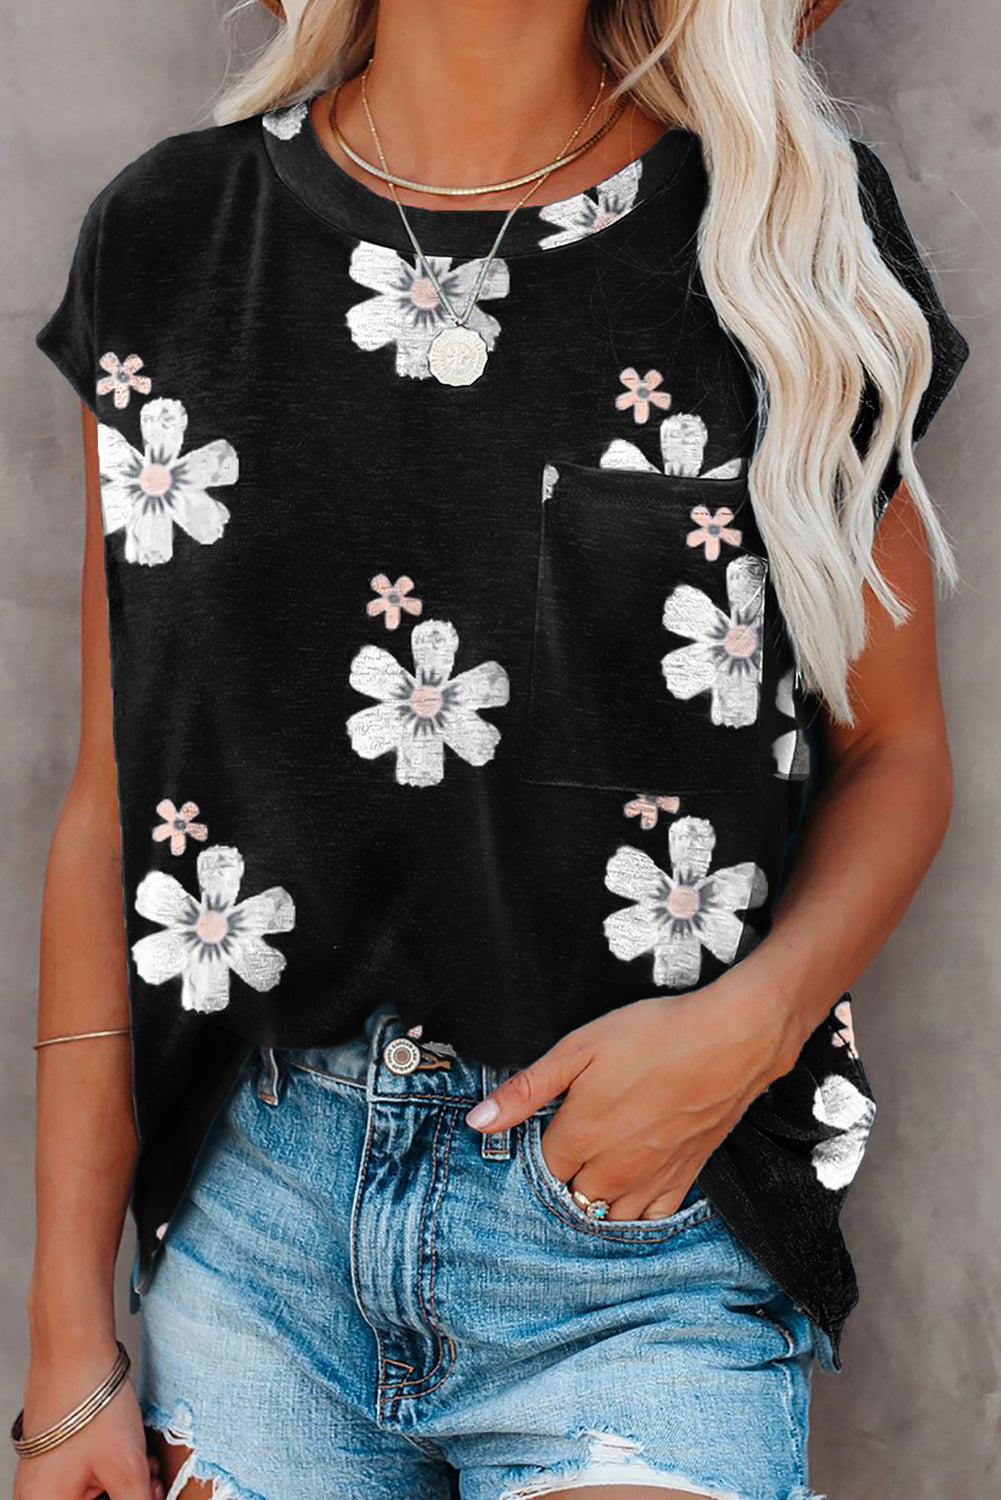 Gray Floral Cap Sleeve T-Shirt with Pocket